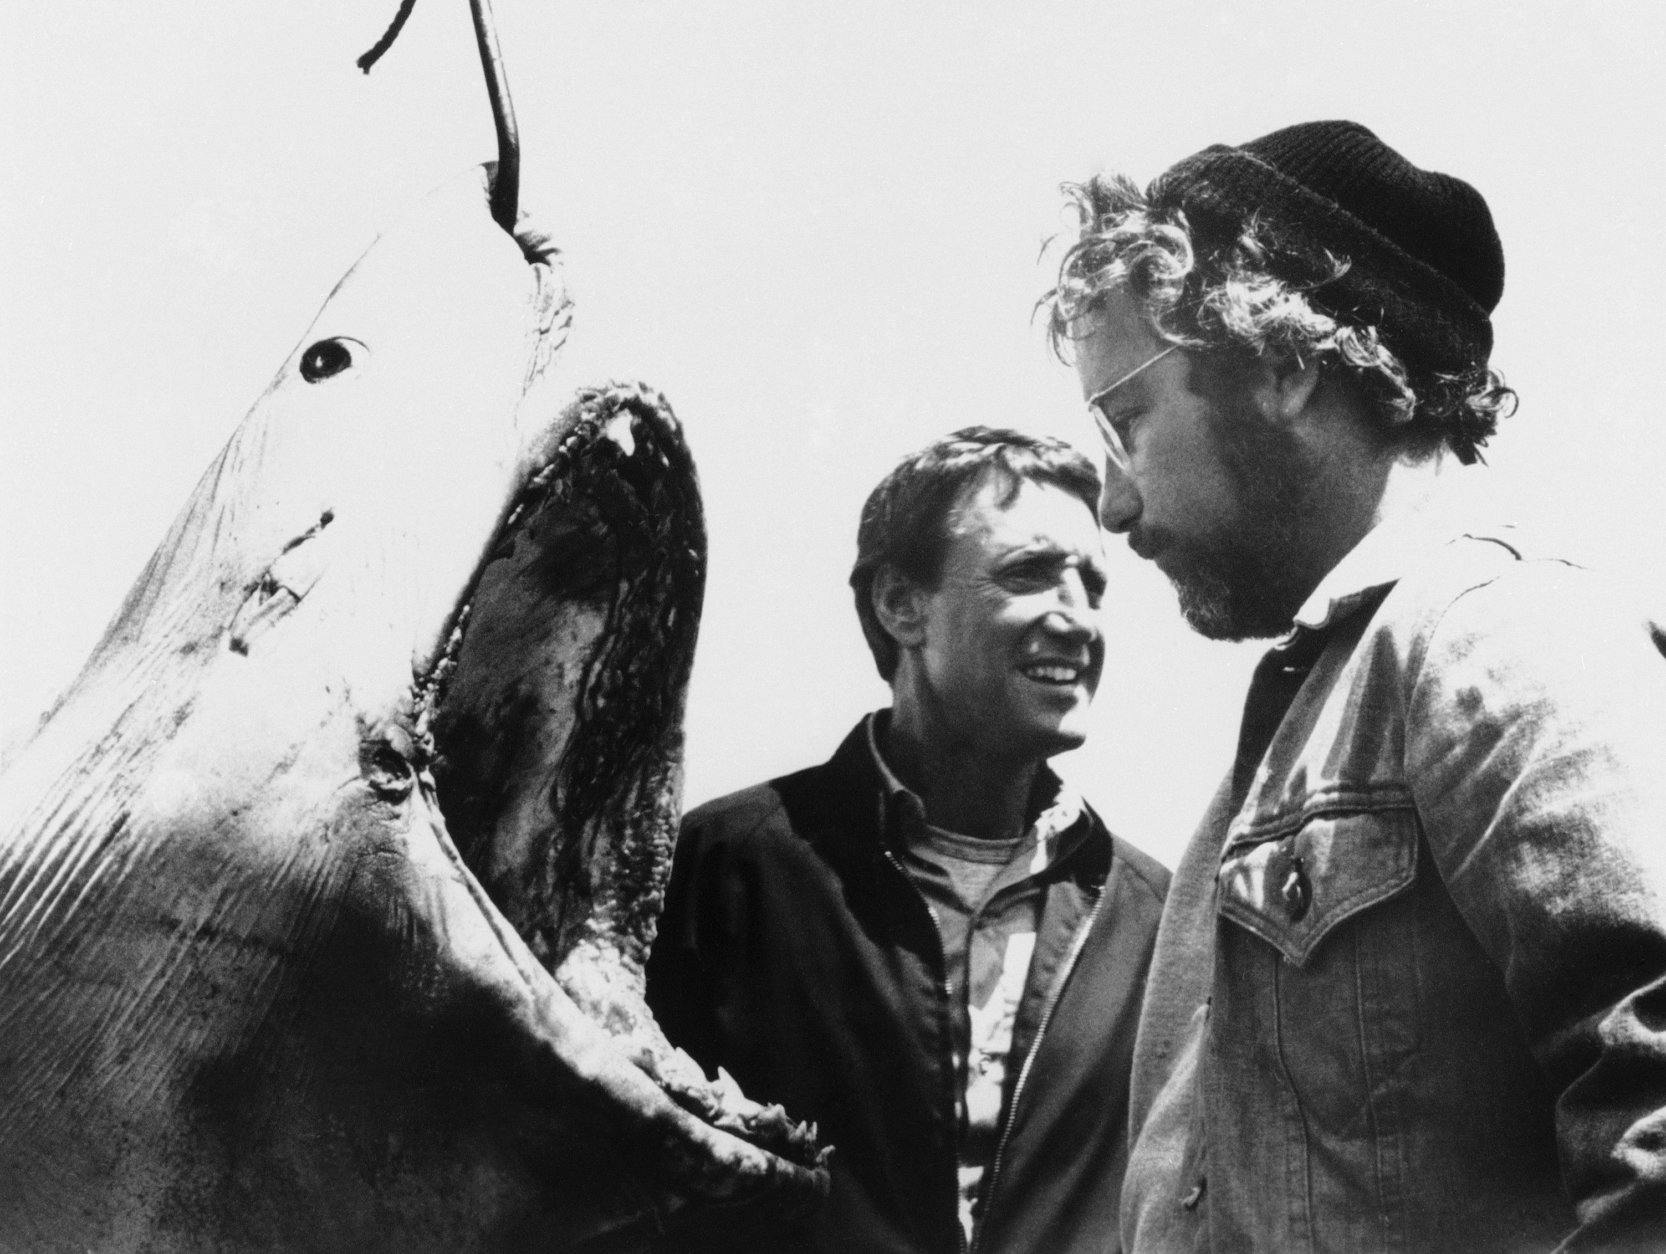 Roy Scheider, left, and Richard Dreyfuss are shown in a scene from the movie "Jaws," 1975. (AP Photo)